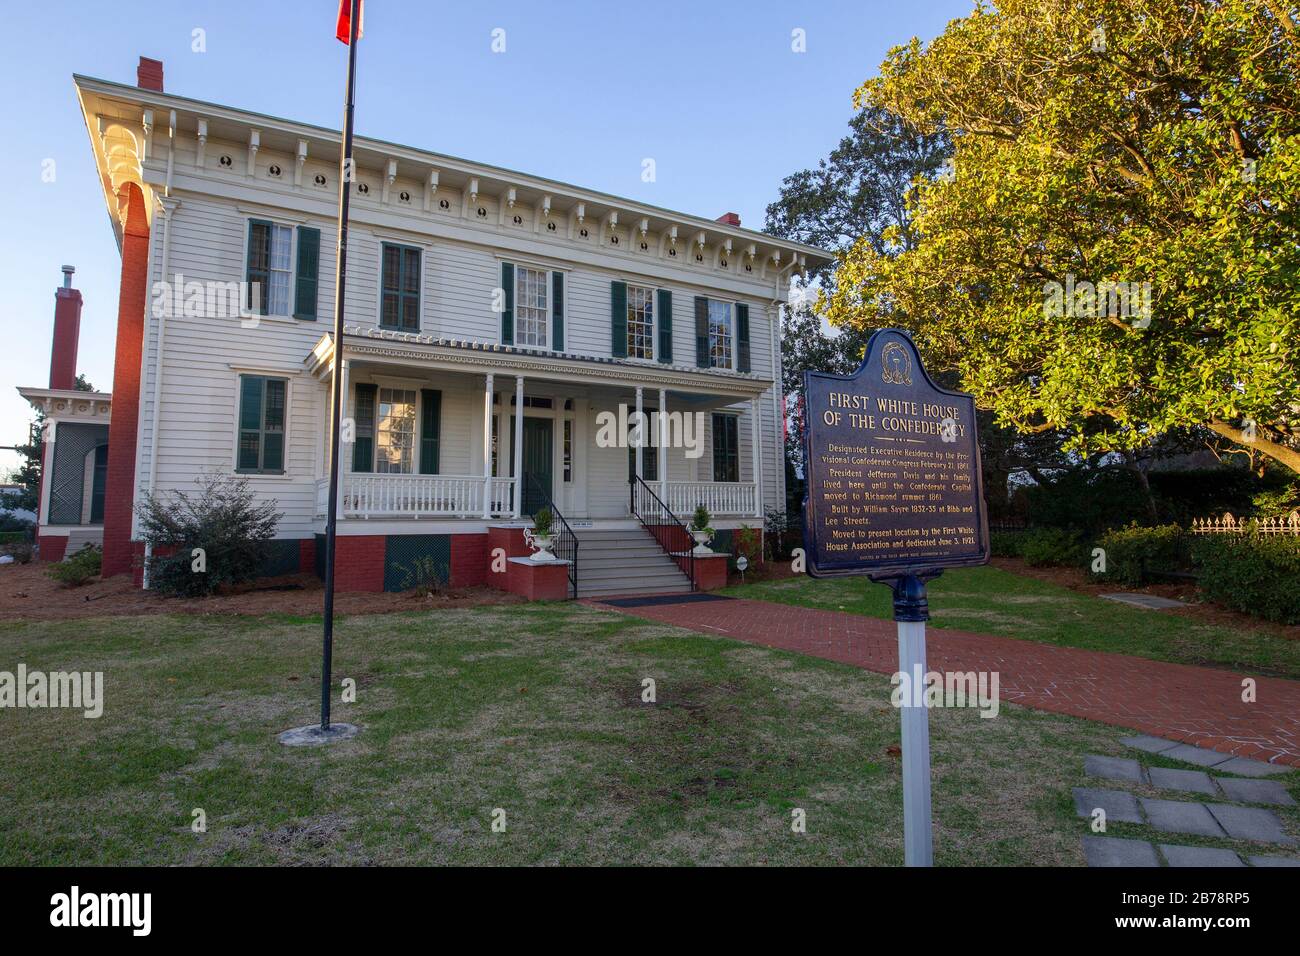 The First White House of the Confederacy while the capital of the Confederate States of America was in Montgomery, Alabama. Stock Photo